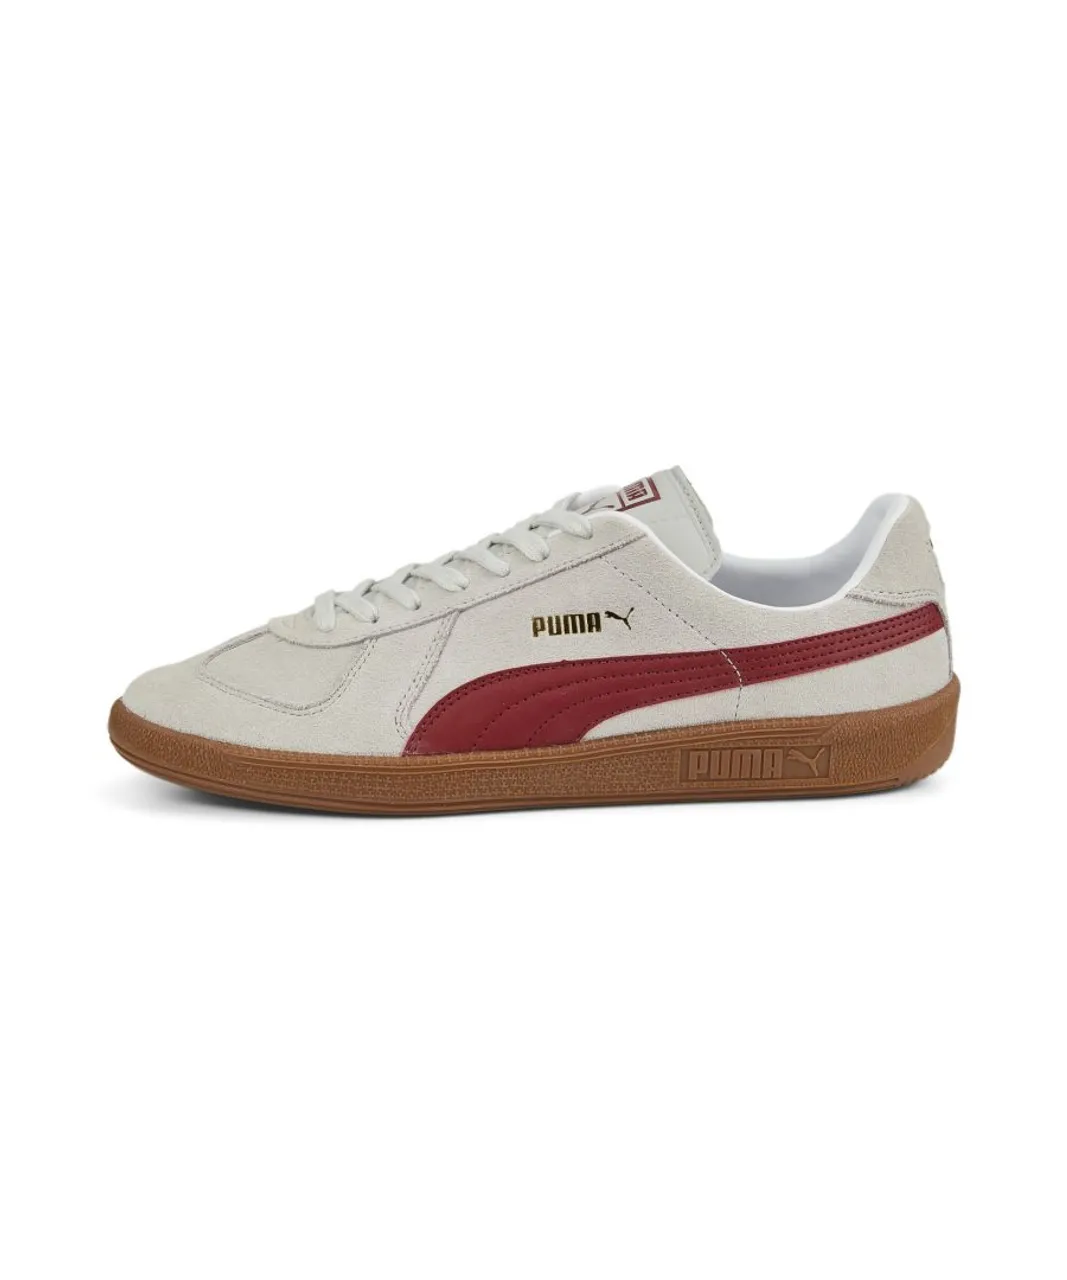 Puma Unisex Army Trainer Suede Trainers - Grey Leather